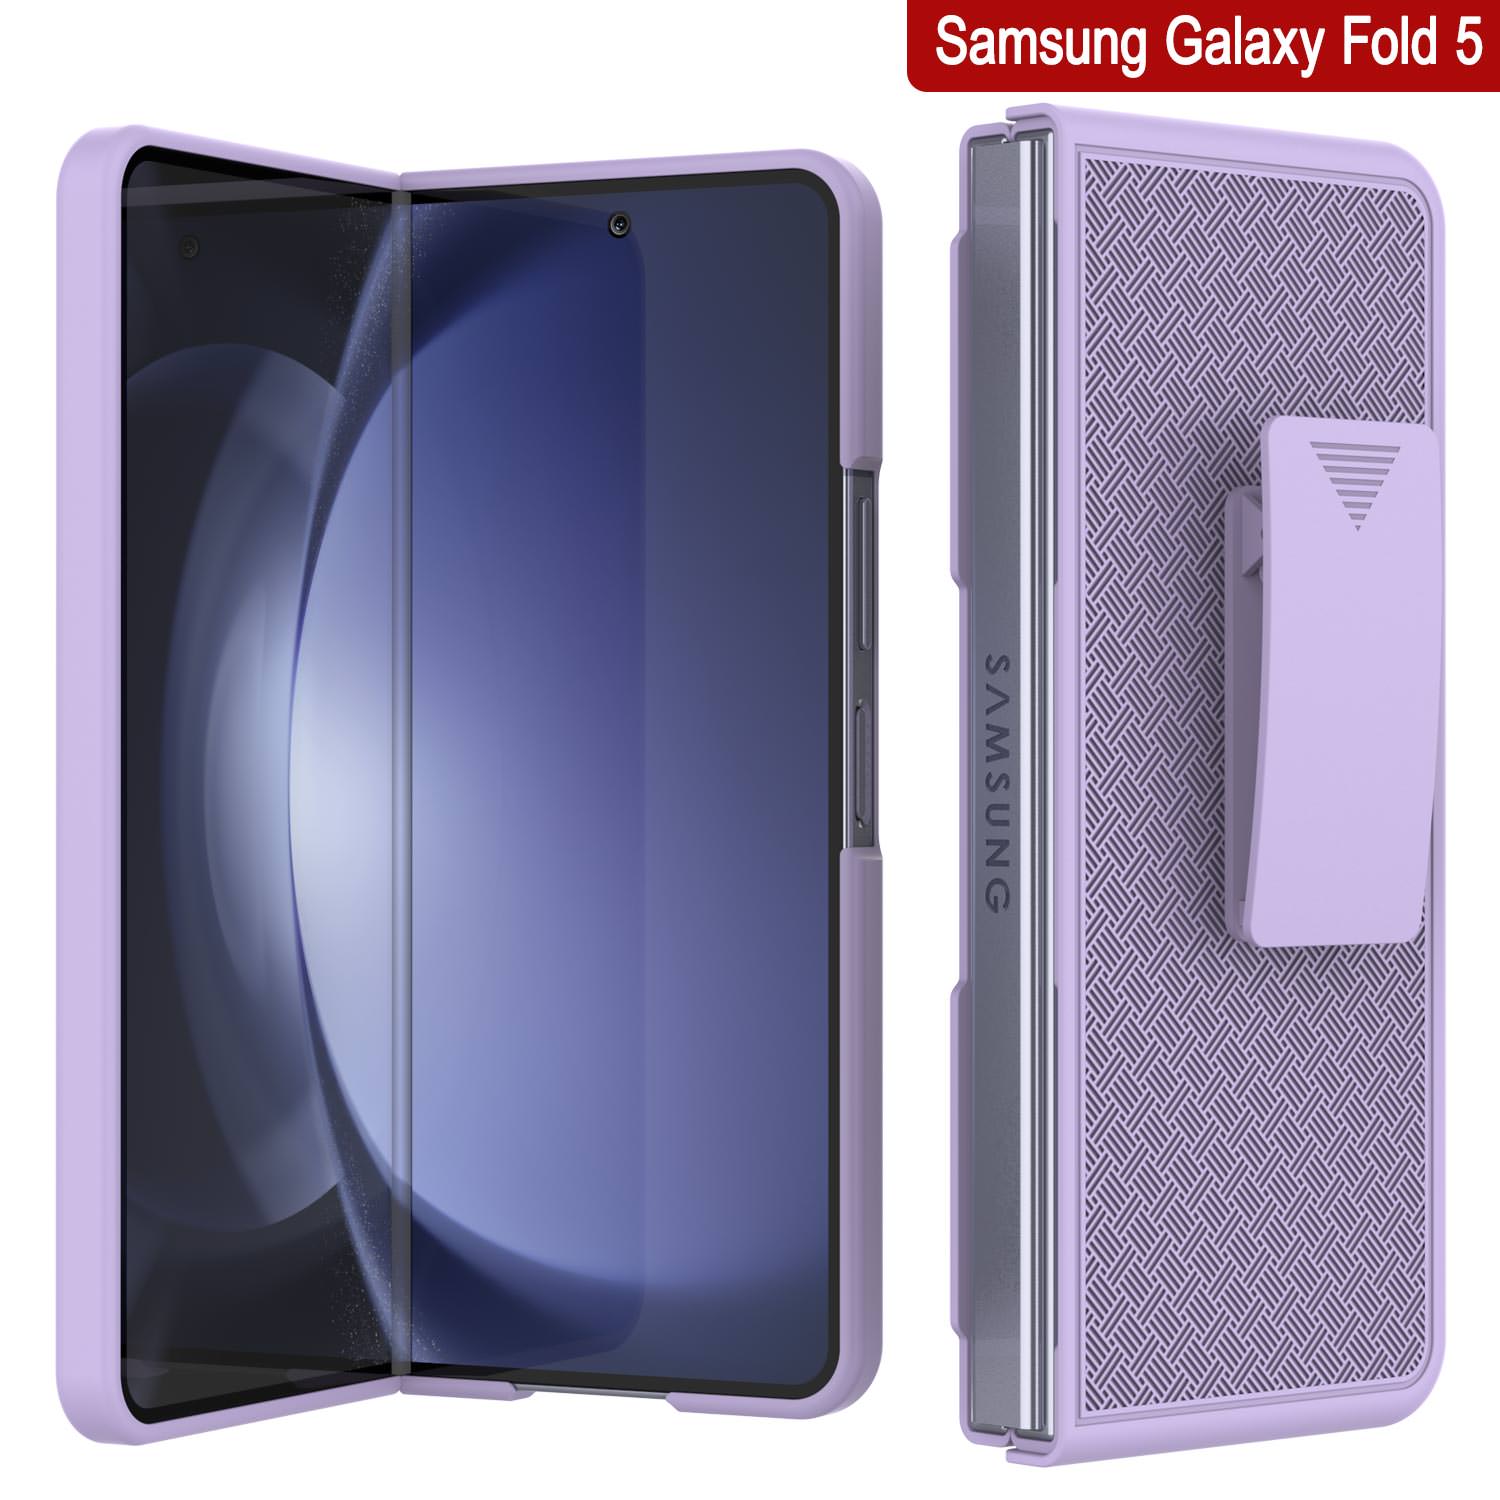 Galaxy Z Fold5 Case With Tempered Glass Screen Protector, Holster Belt Clip & Built-In Kickstand [Lilac]